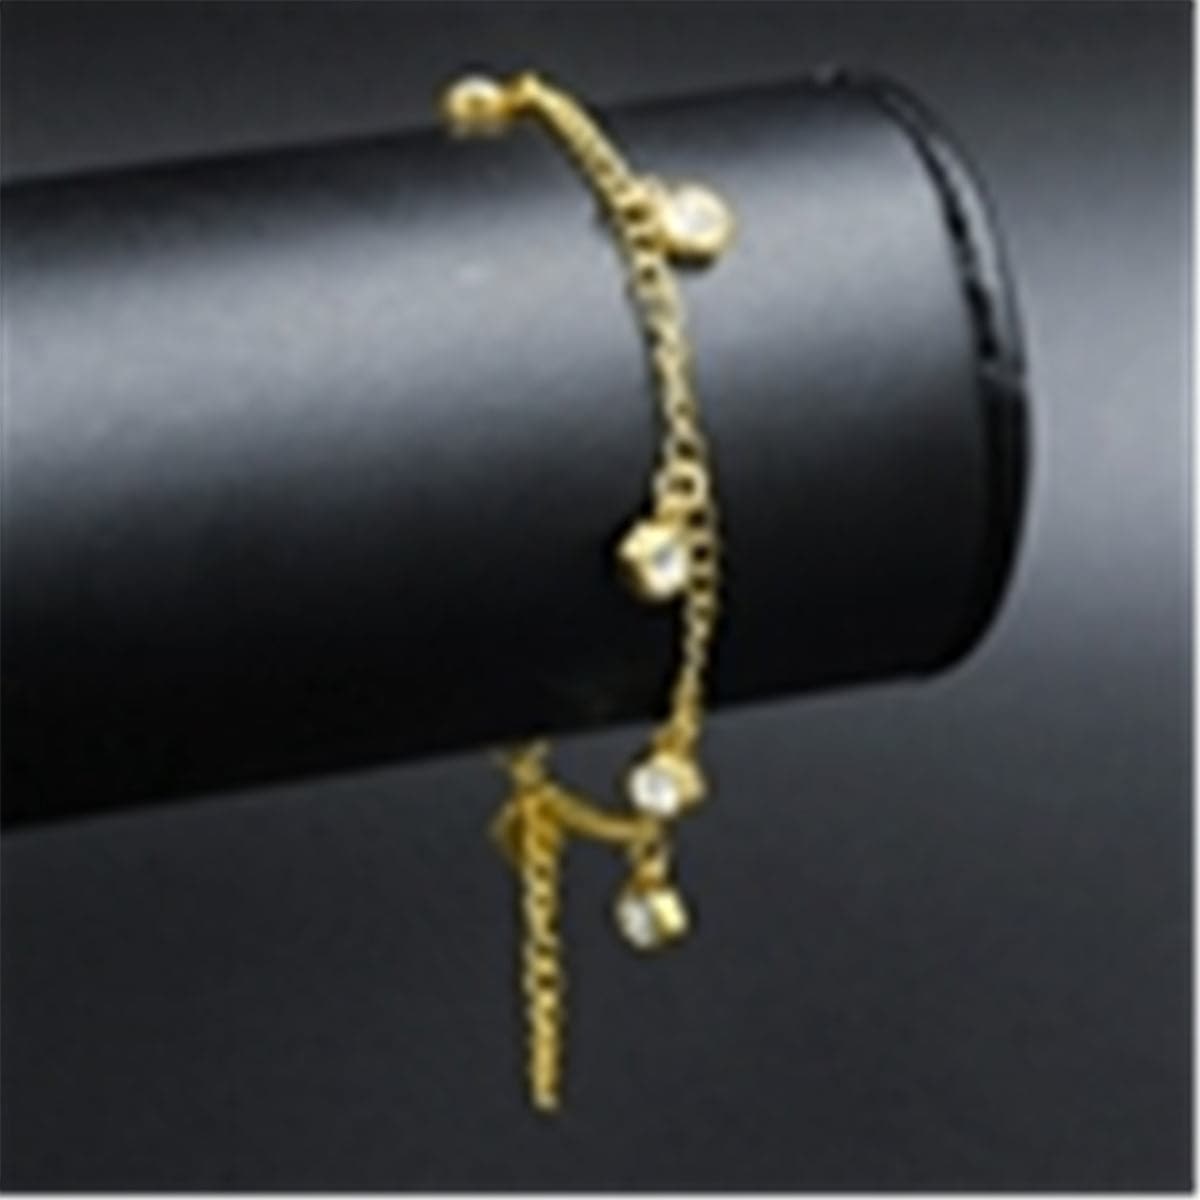 Cubic Zirconia & 18K Gold-Plated Hexagon Charm Anklet